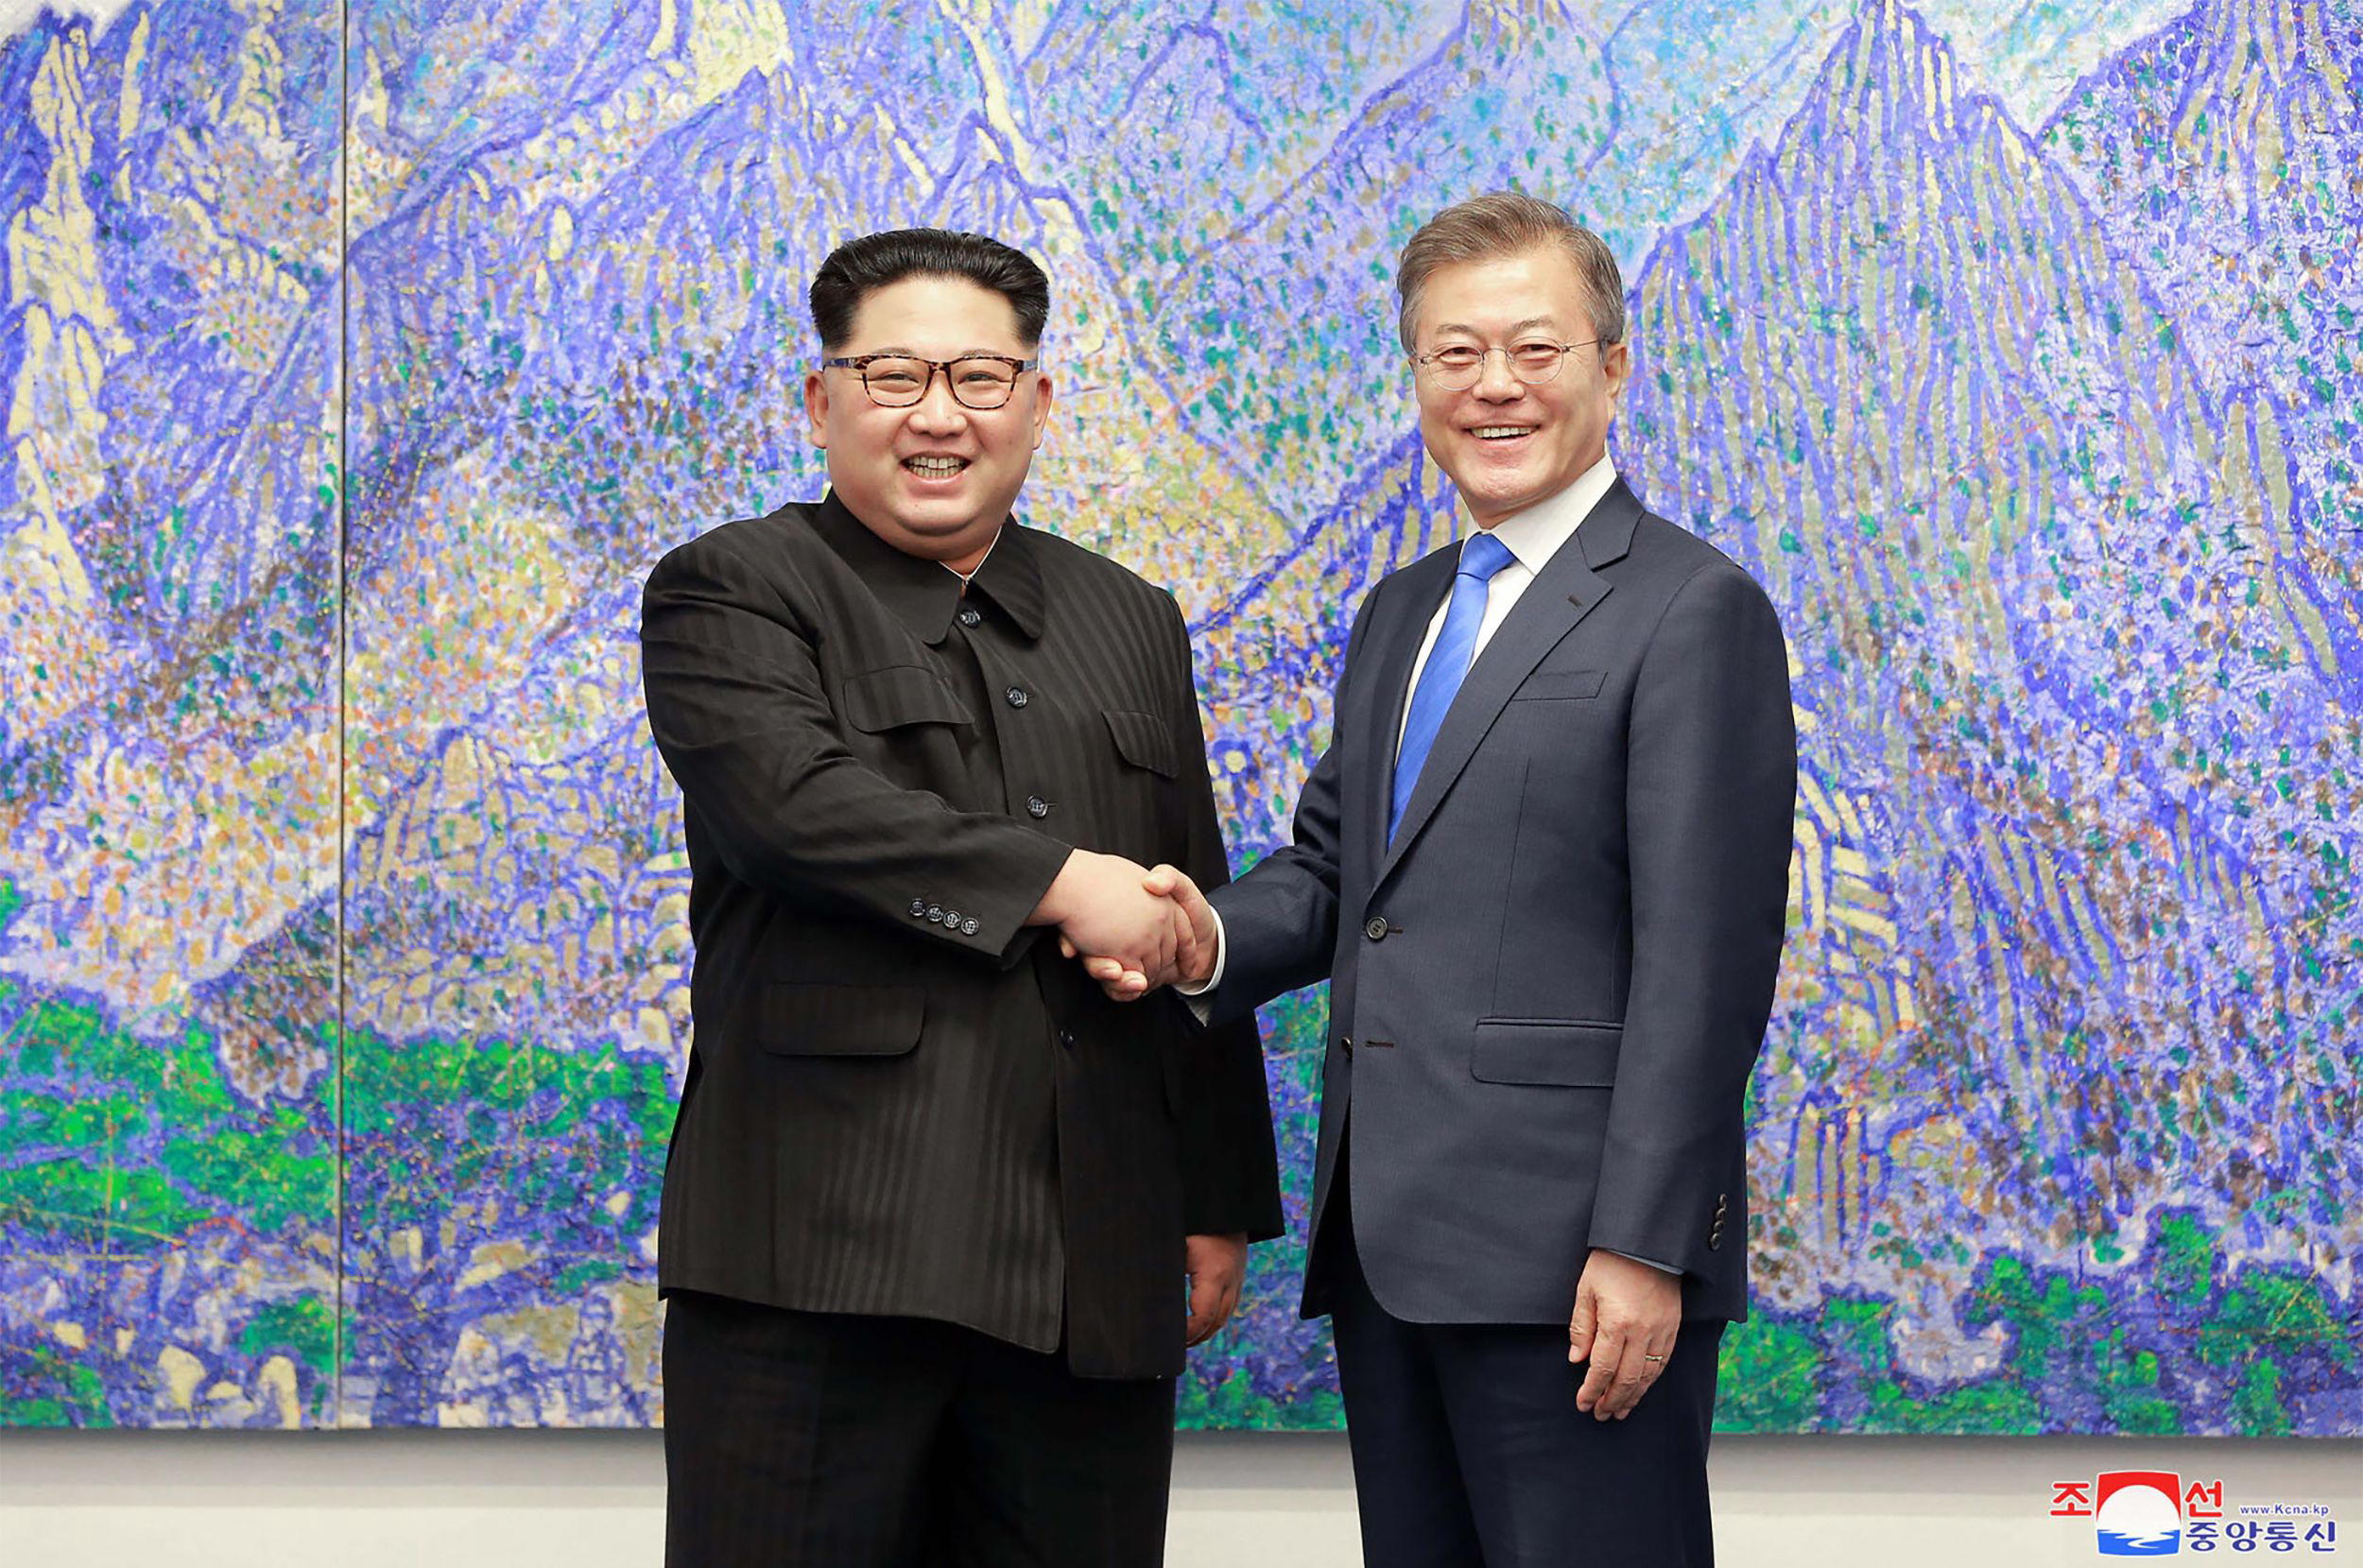 PHOTO: North Korea's leader Kim Jong Un (L) is pictured shaking hands with South Korea's President Moon Jae-in (R) during the Inter-Korean summit in the Peace House building on the southern side of the truce village of Panmunjom, April 27, 2018.